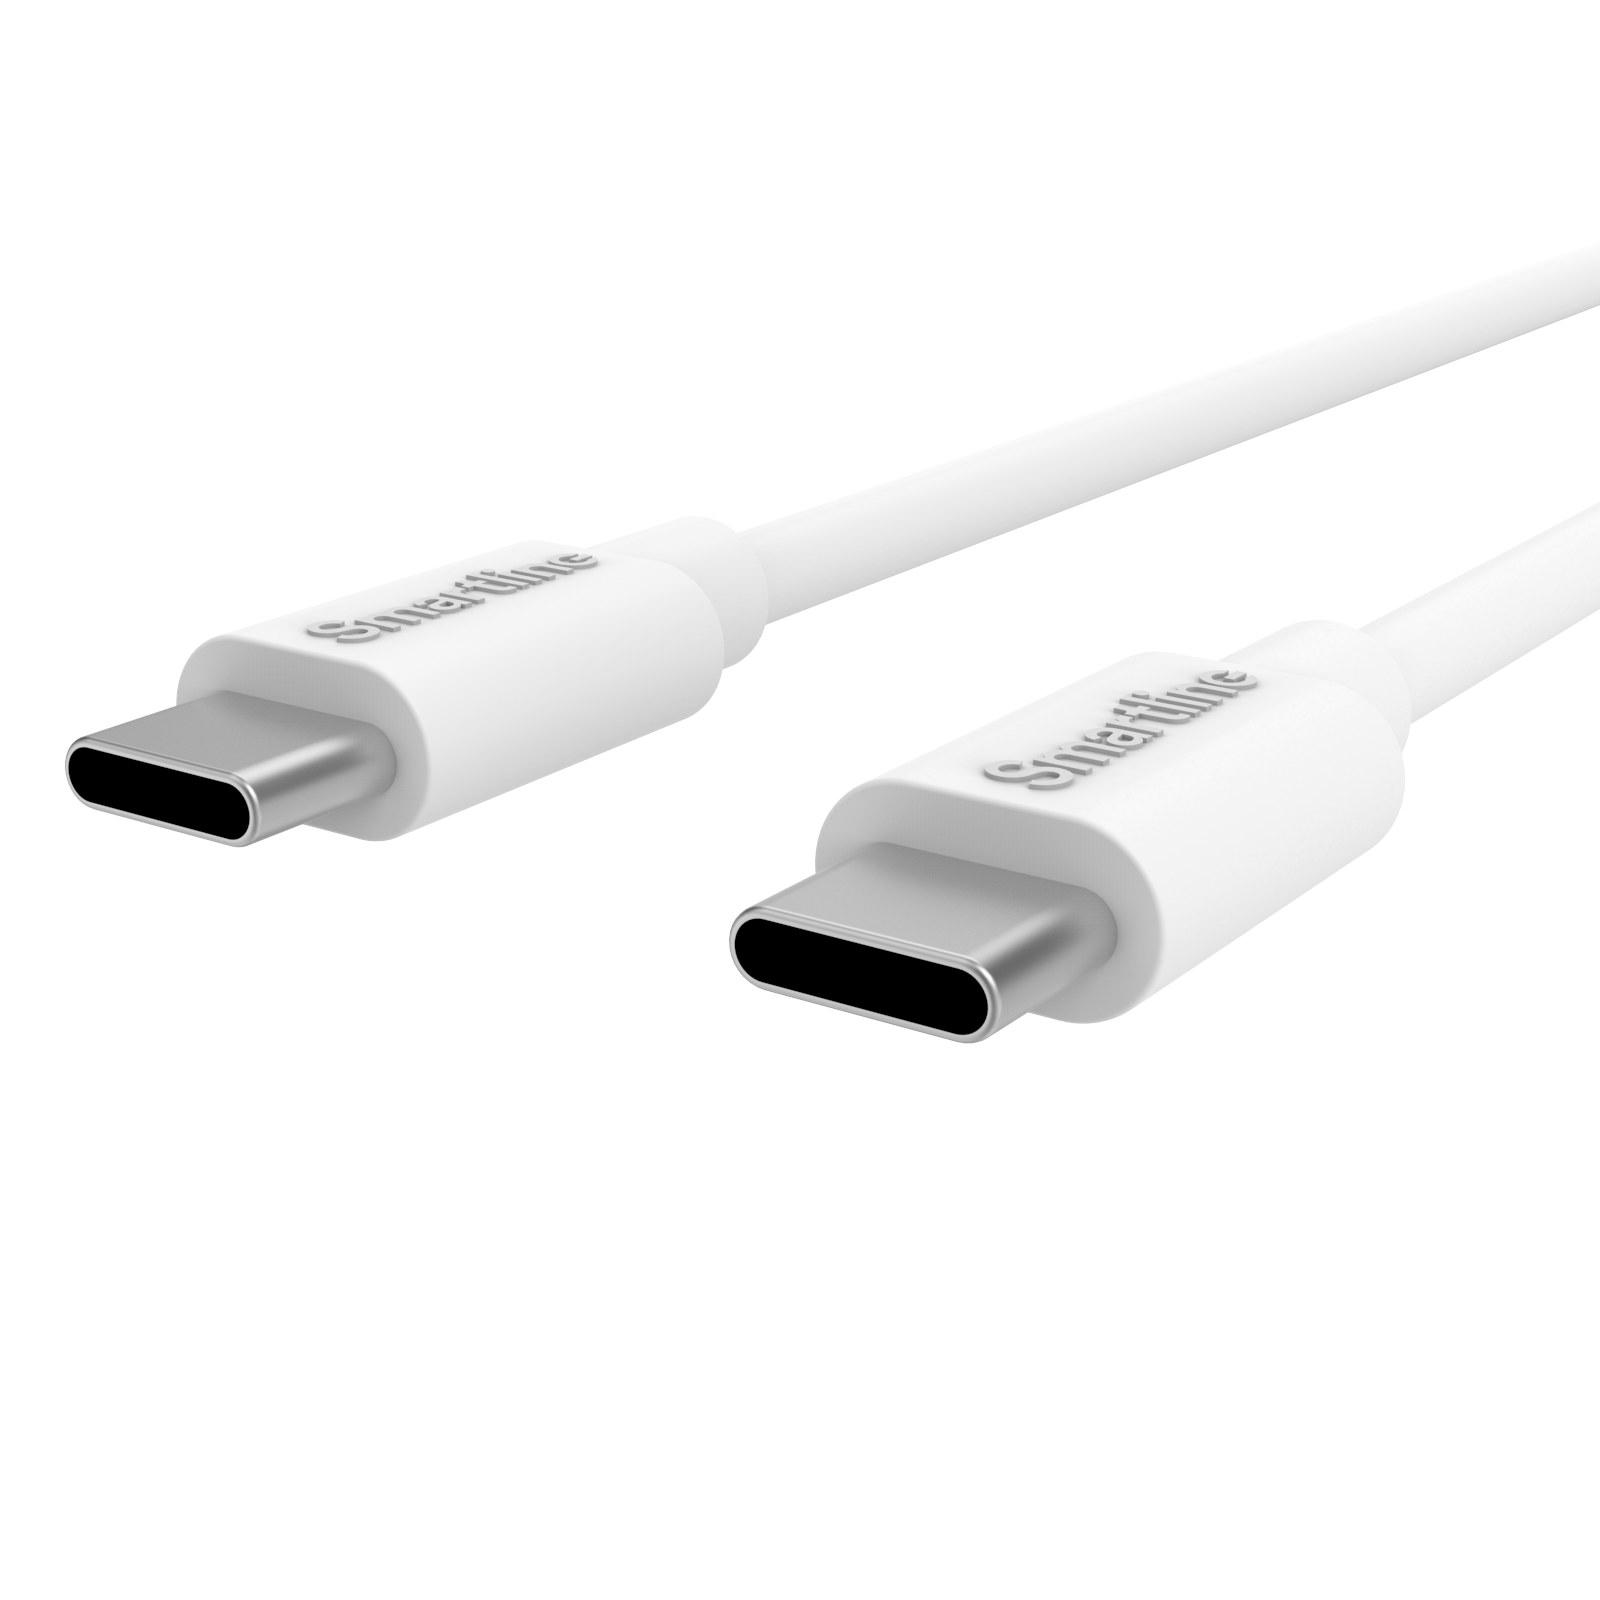 Complete Charger for Xiaomi phones - 2m Cable and Wall Charger USB-C - Smartline